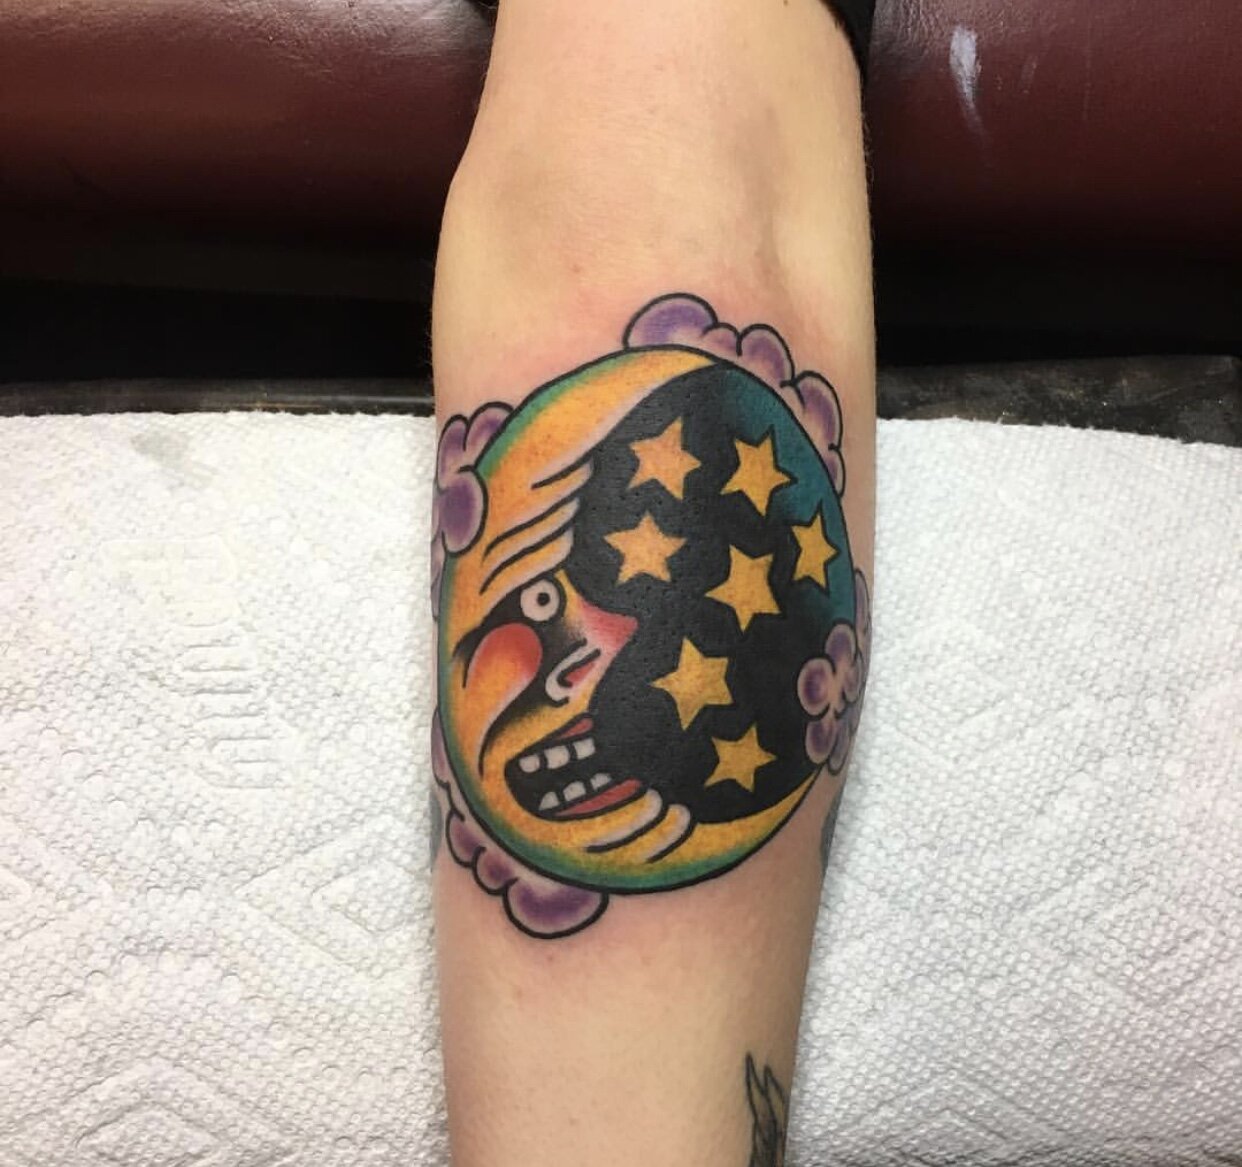 Crescent moon tattoo in bold color by Andrew Patch at Southern Star Tattoo in Atlanta, Georgia.